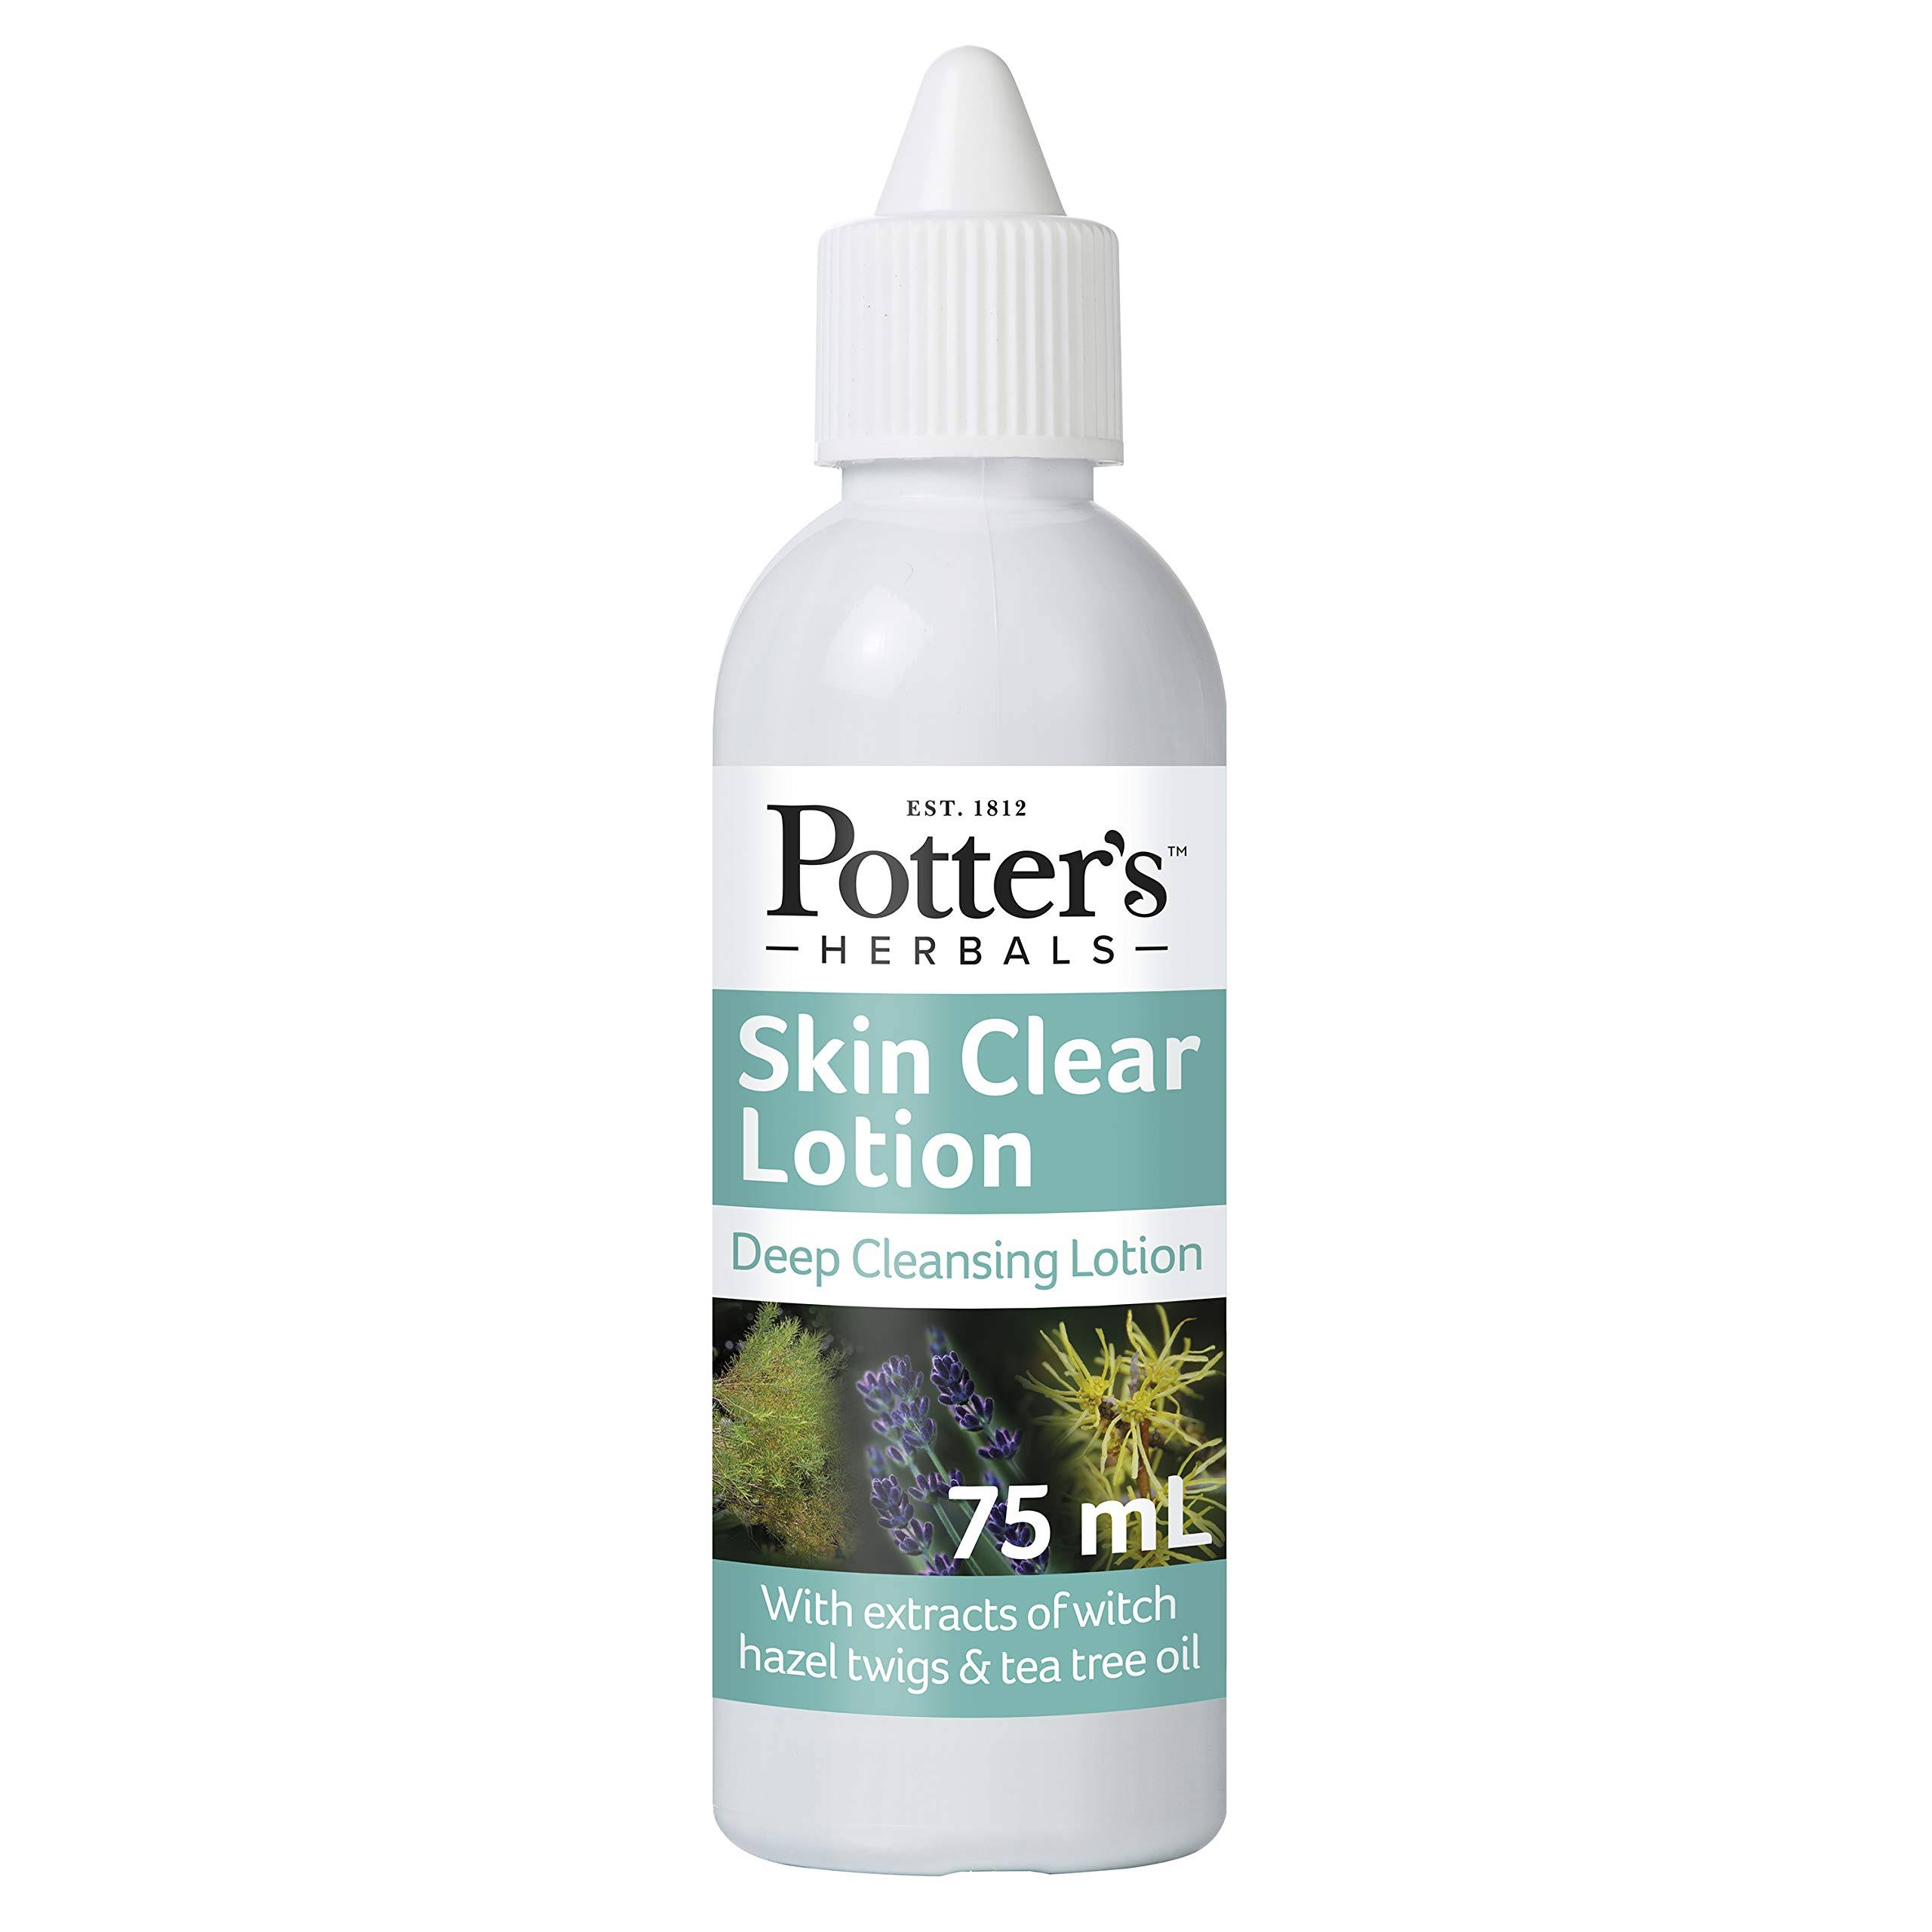 Potters Herbals Skin Clear Lotion - 75ml